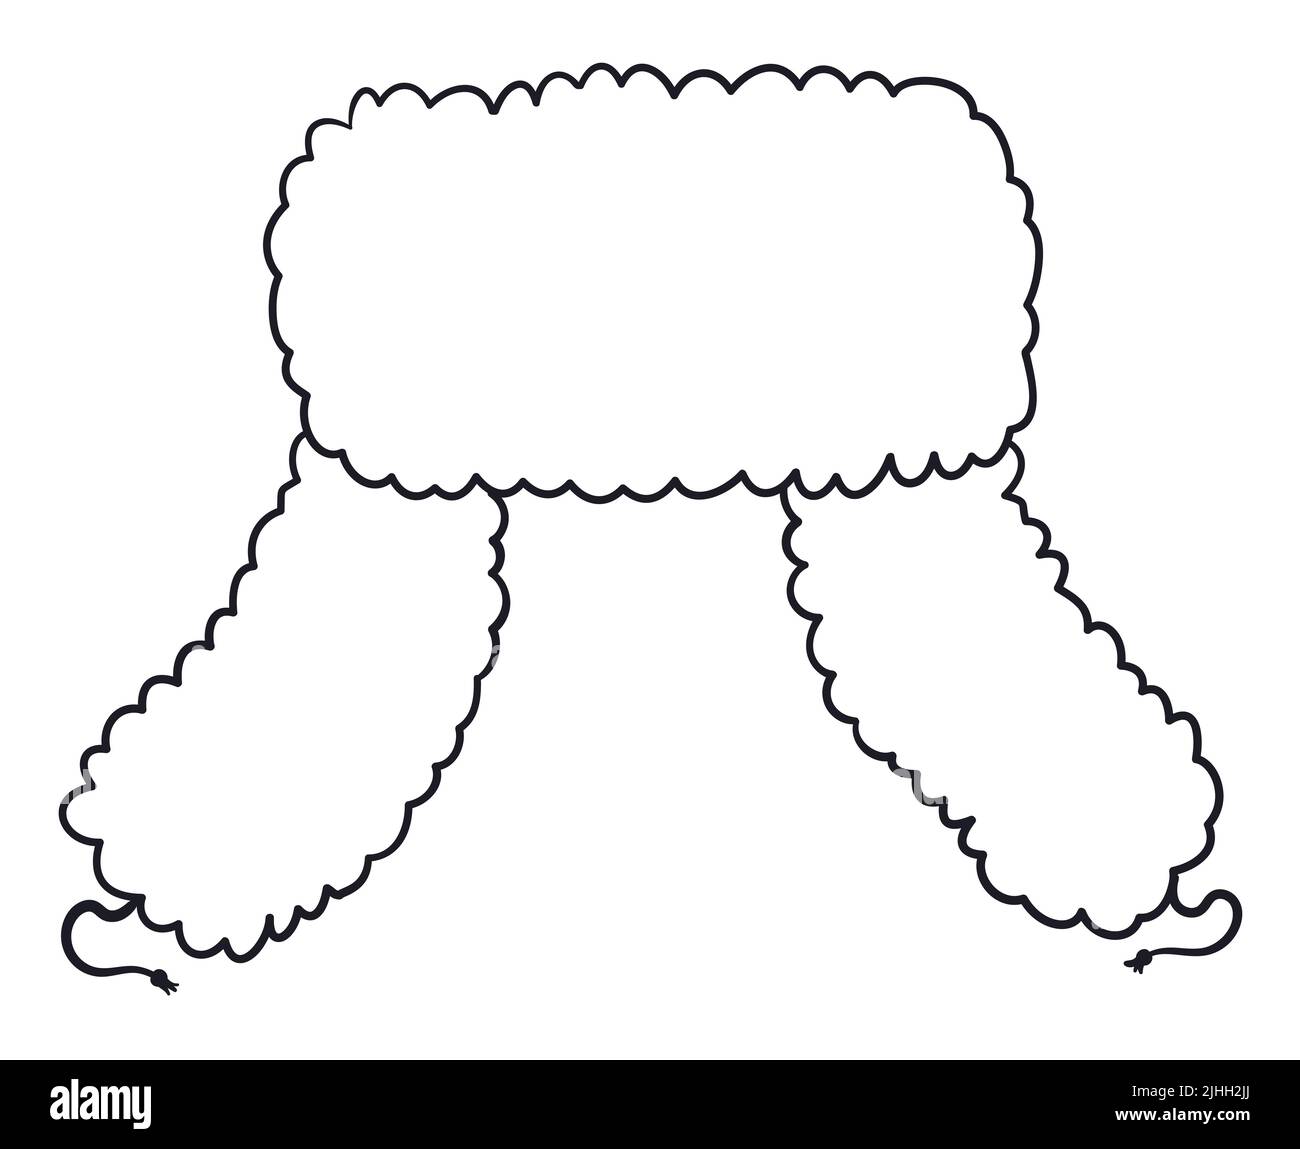 Frontal view of traditional ushanka hat. Colorless design in outline style for coloring activities. Stock Vector